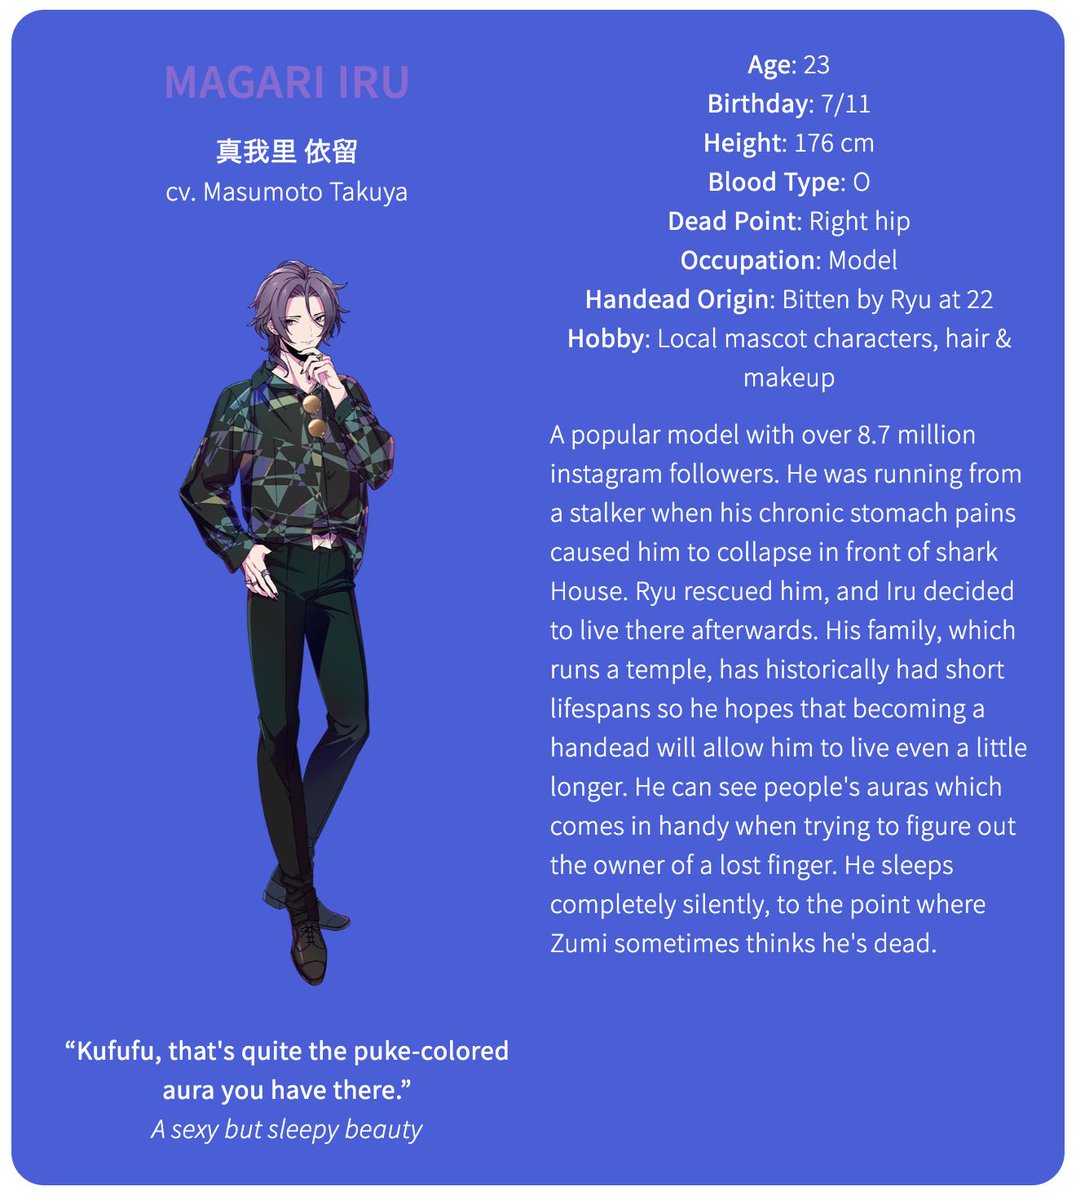 The fourth member of HIGH-TIDEMagari Iru (cv. Masumoto Takuya)Age: 23Birthday: 7/11Height: 176 cmBlood Type: ODead Point: Right hipOccupation: ModelHandead Origin: Bitten by Ryu at 22Hobby: Local mascot characters, hair & makeup